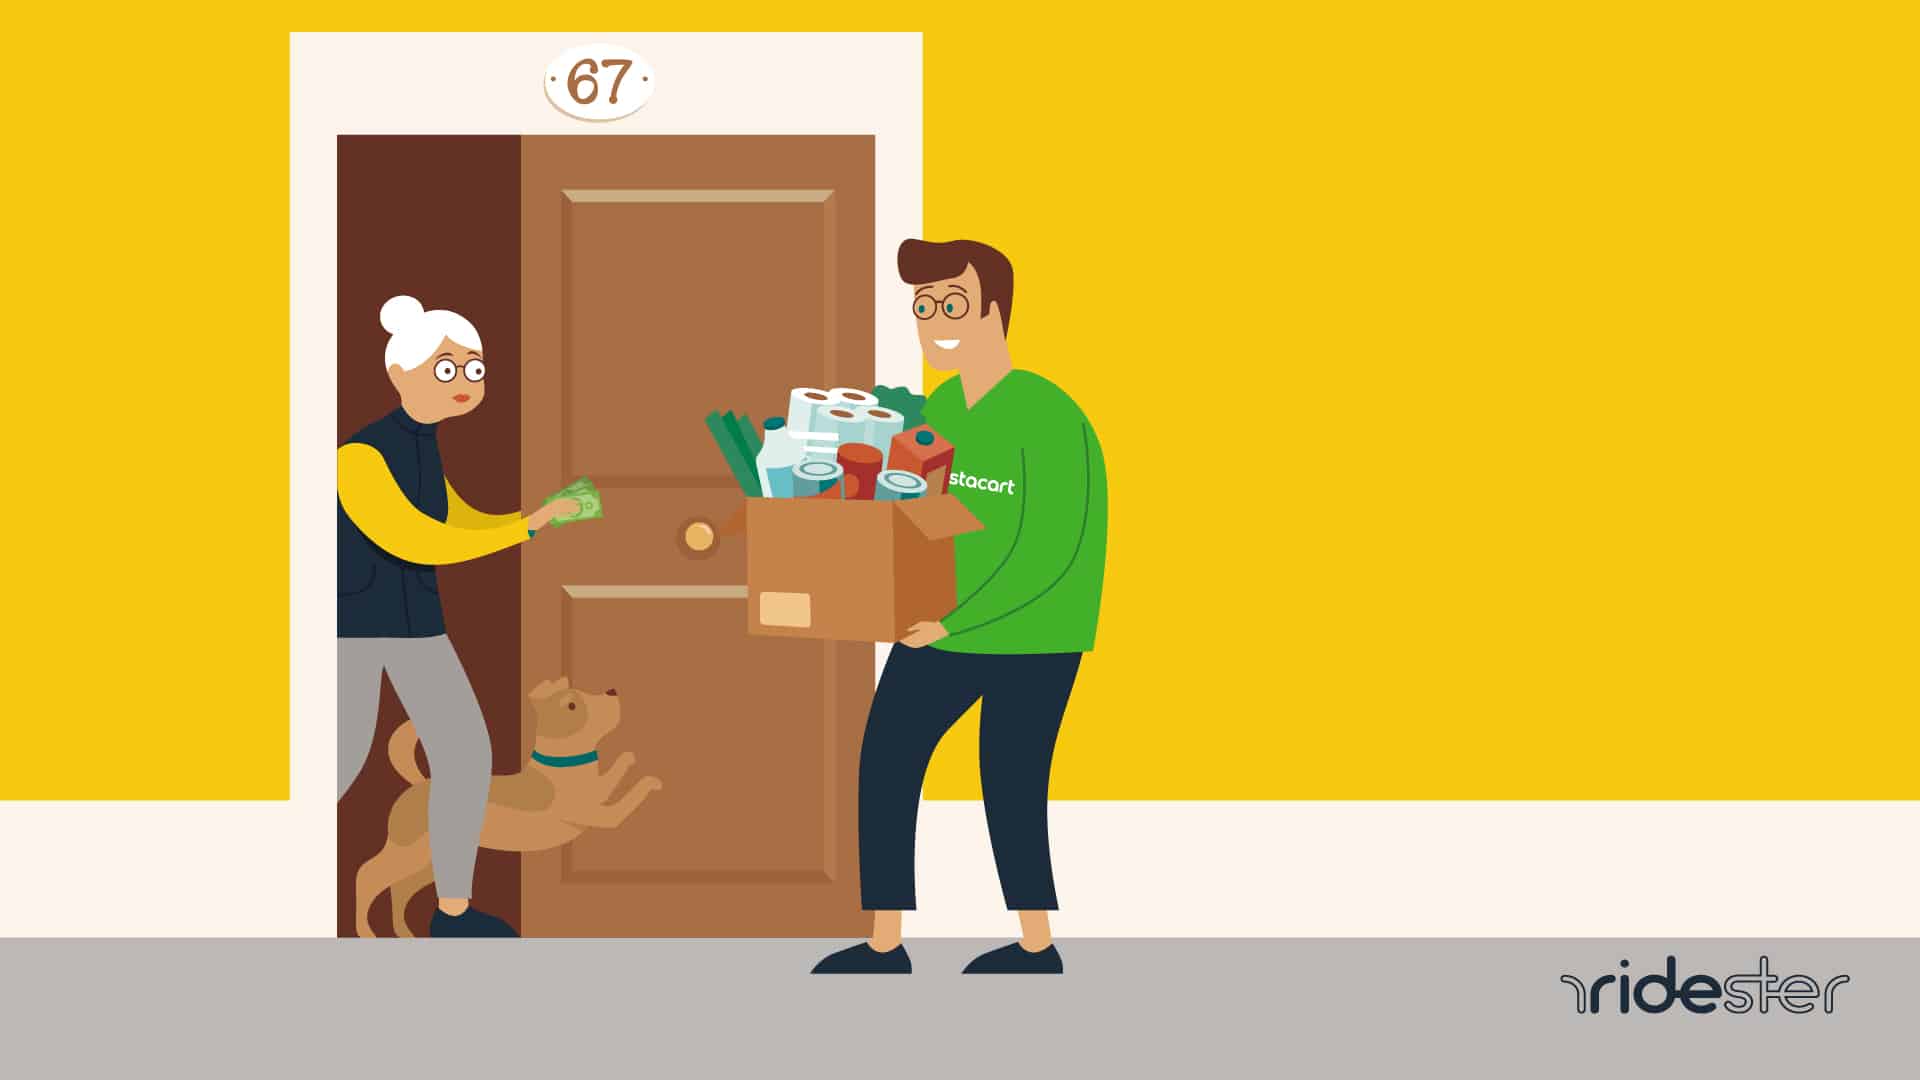 vector graphic showing instacart tipping - an instacart shopper delivering groceries to a woman standing inside a door and giving the driver cash for the order he is dropping off